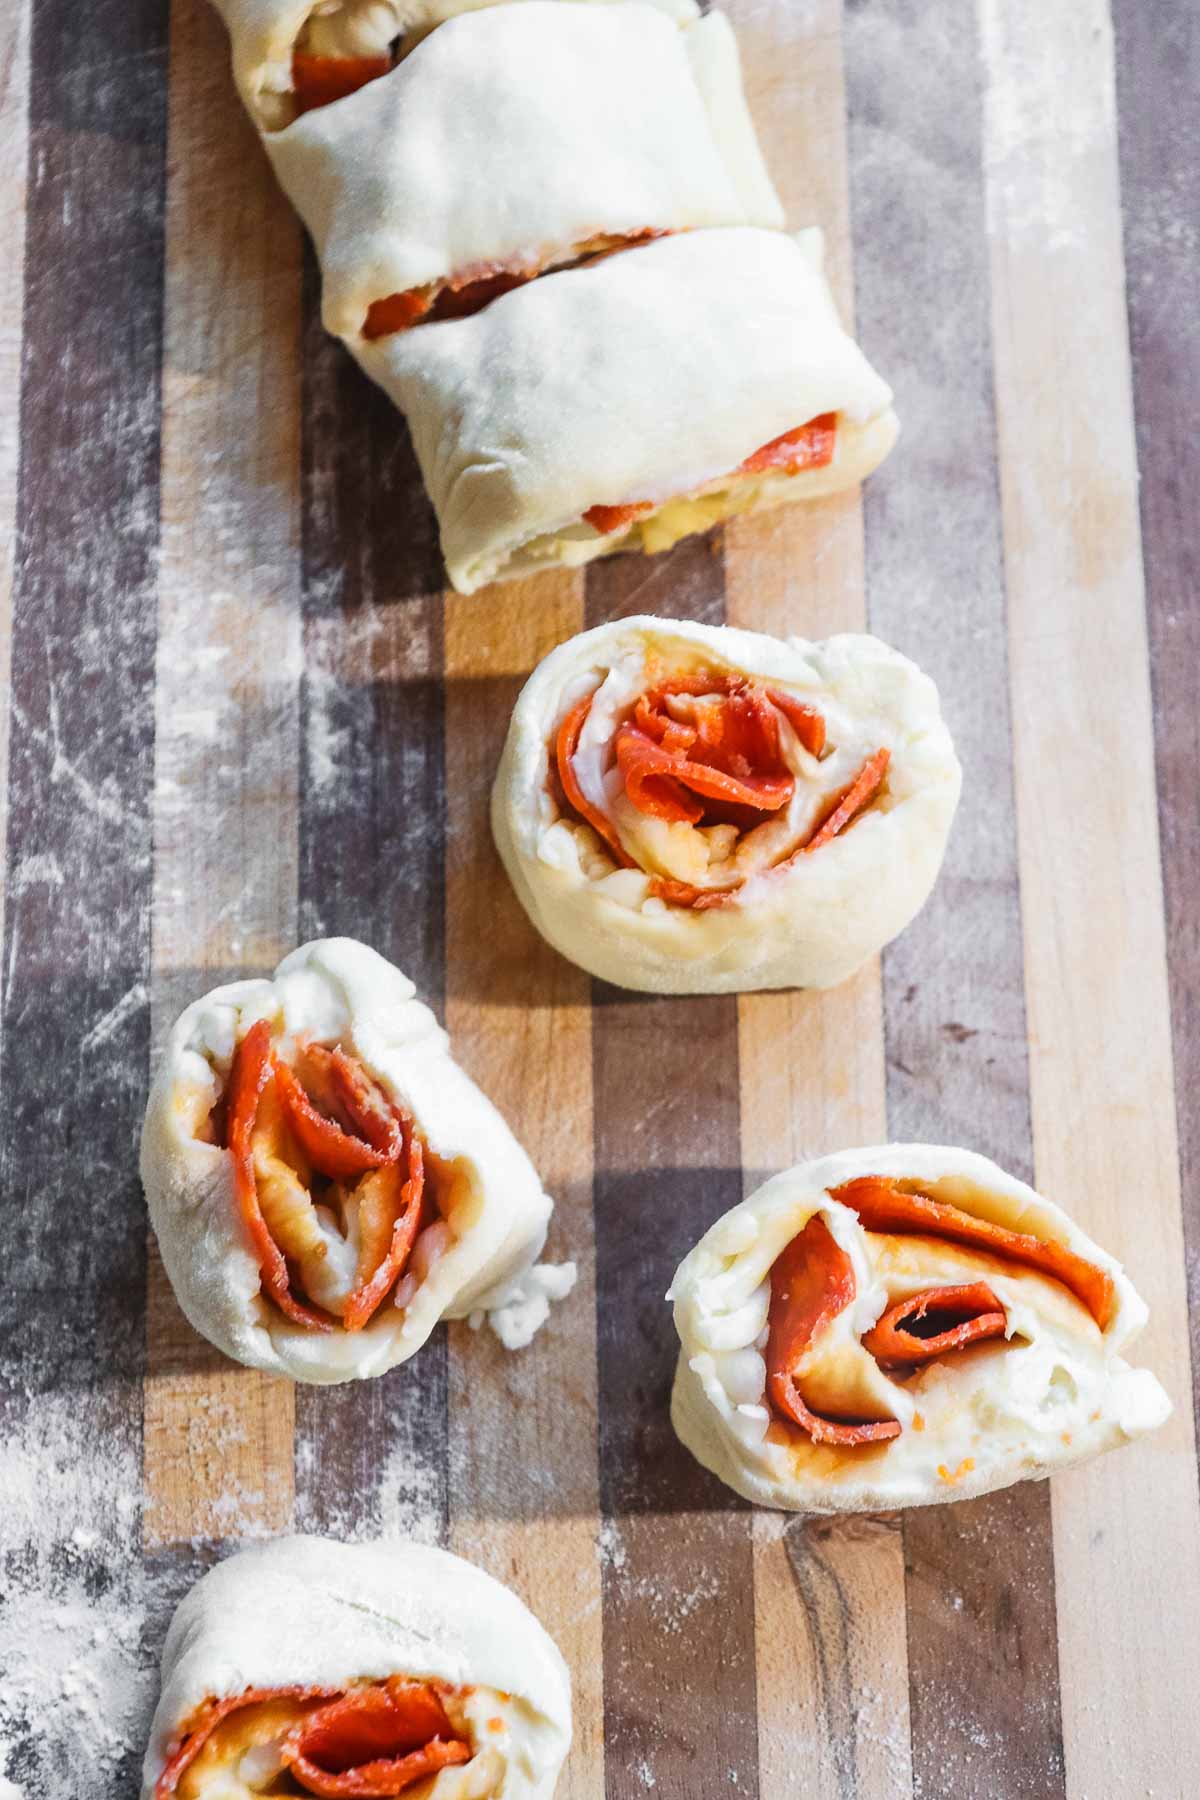 Rolled up dough with pepperoni sliced into pinwheels